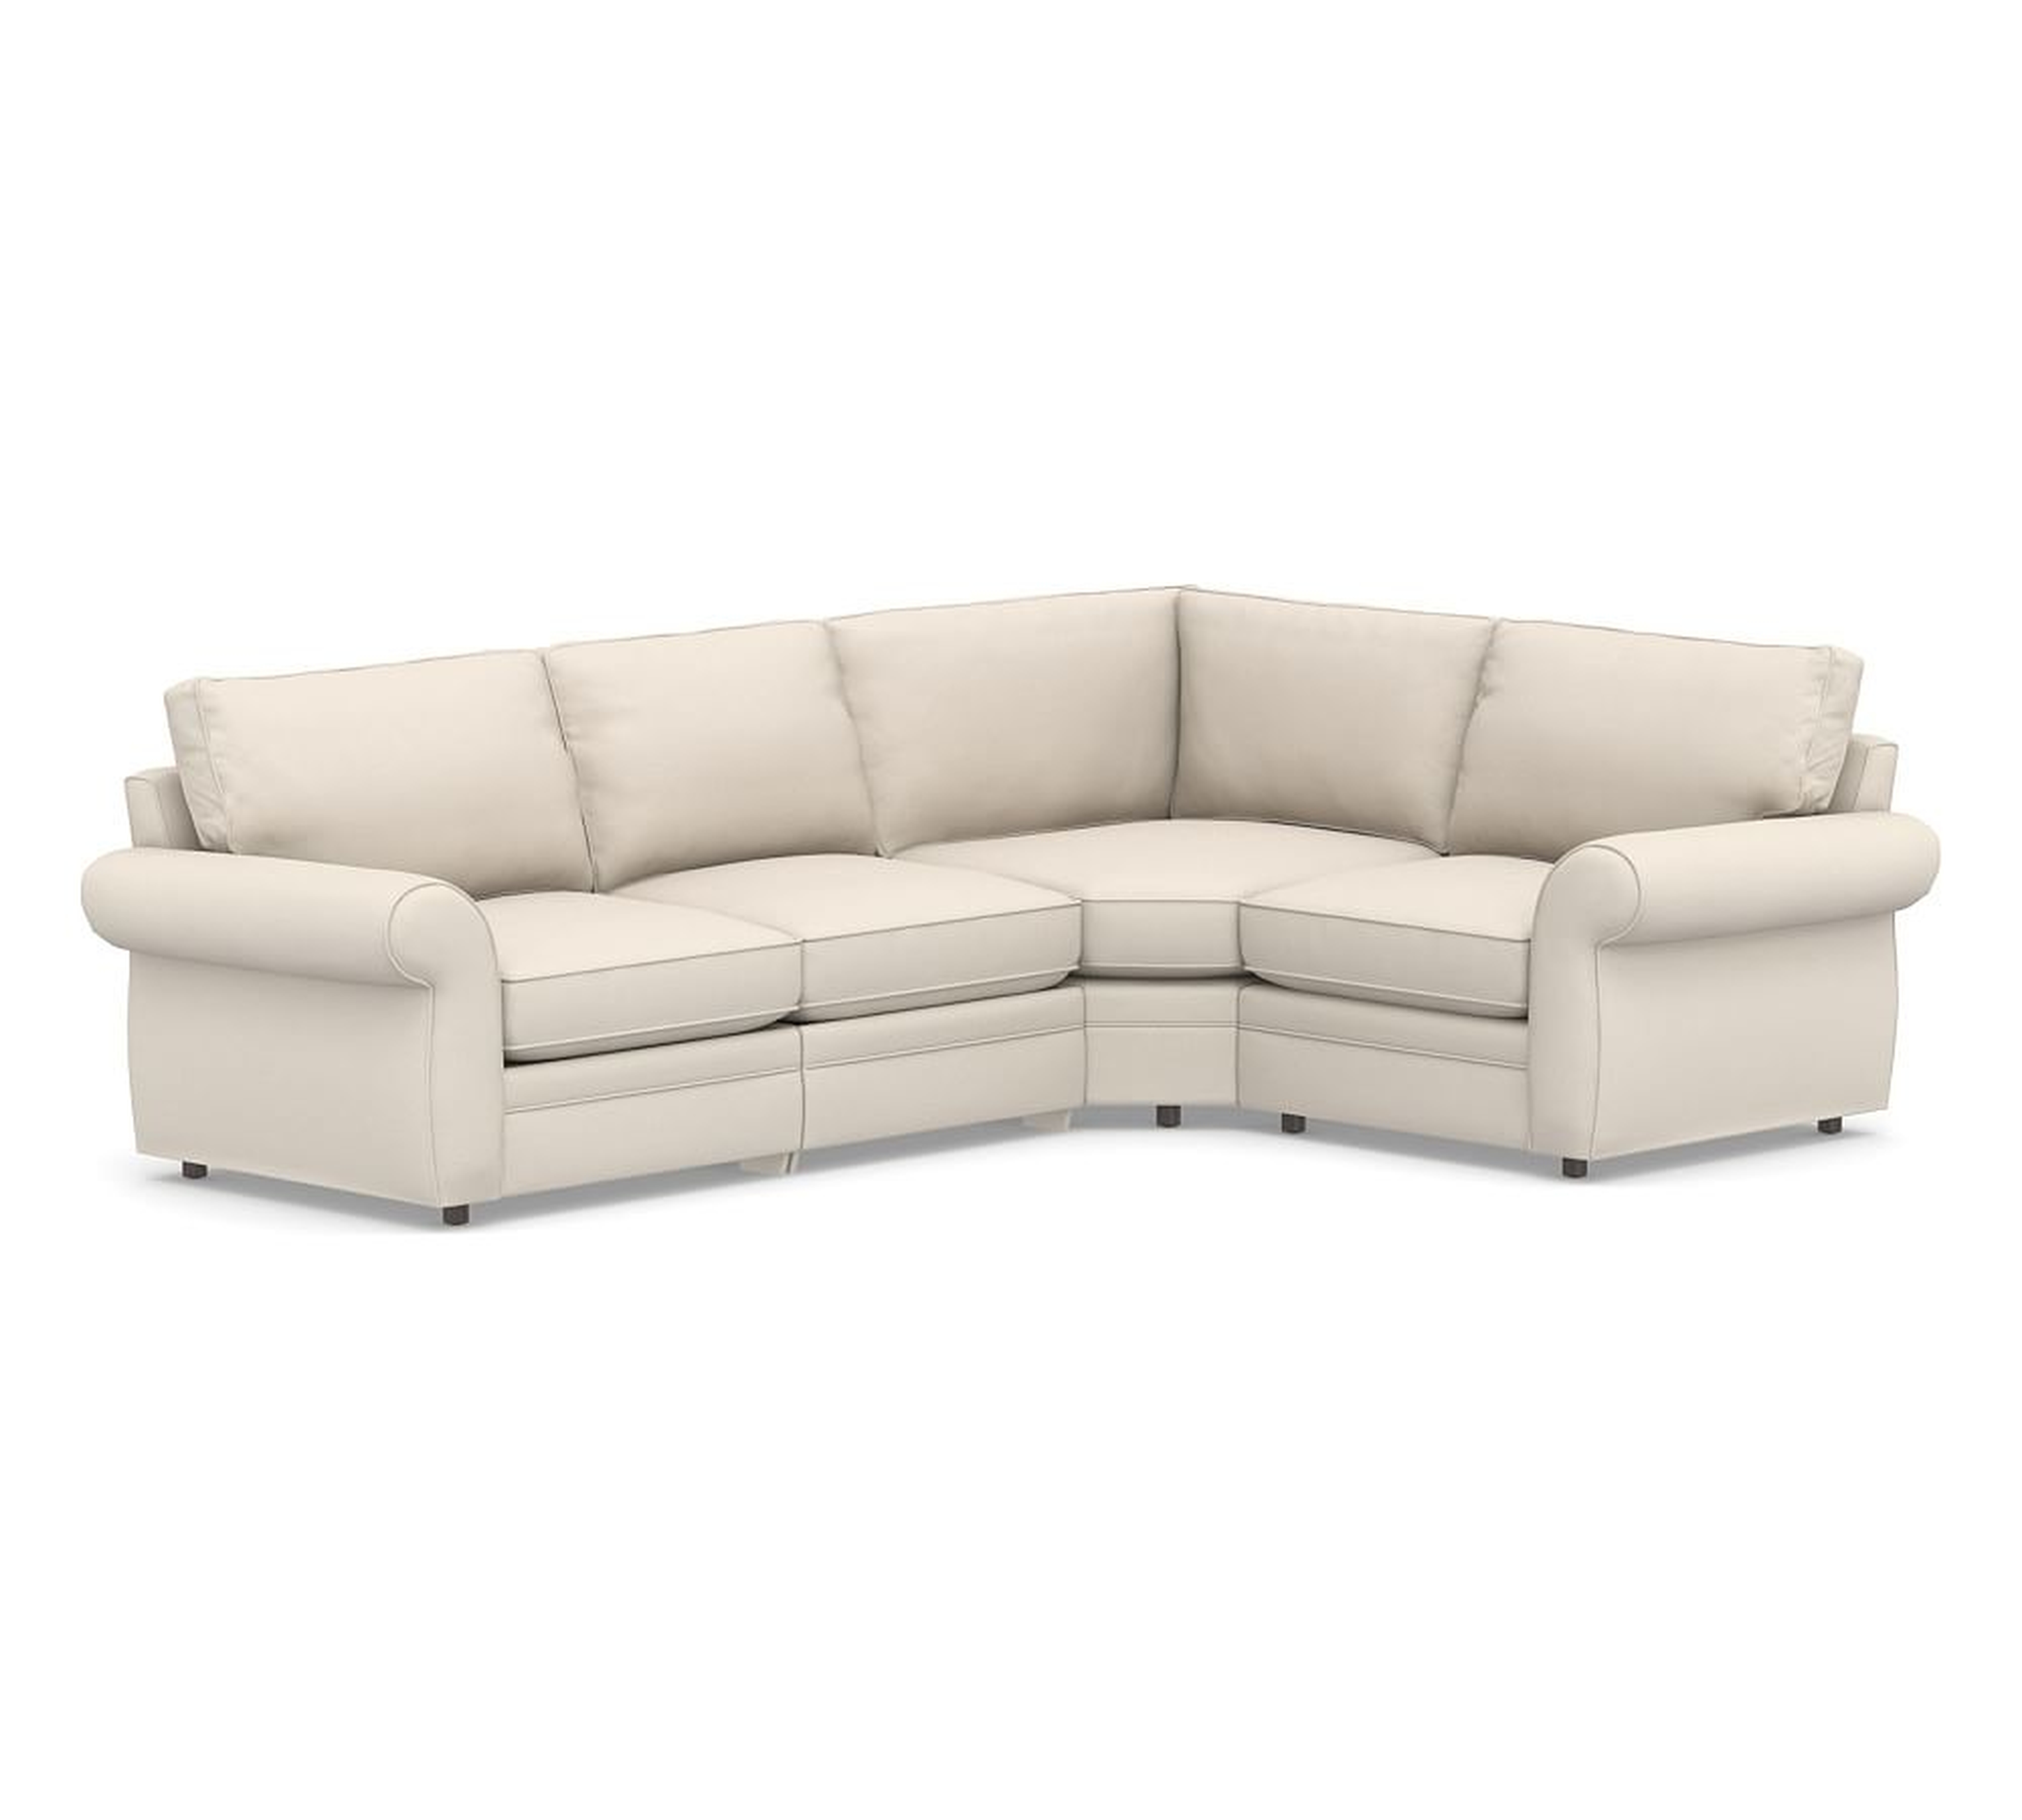 Pearce Roll Arm Upholstered Left Arm 4-Piece Reclining Wedge Sectional, Down Blend Wrapped Cushions, Performance Brushed Basketweave Oatmeal - Pottery Barn